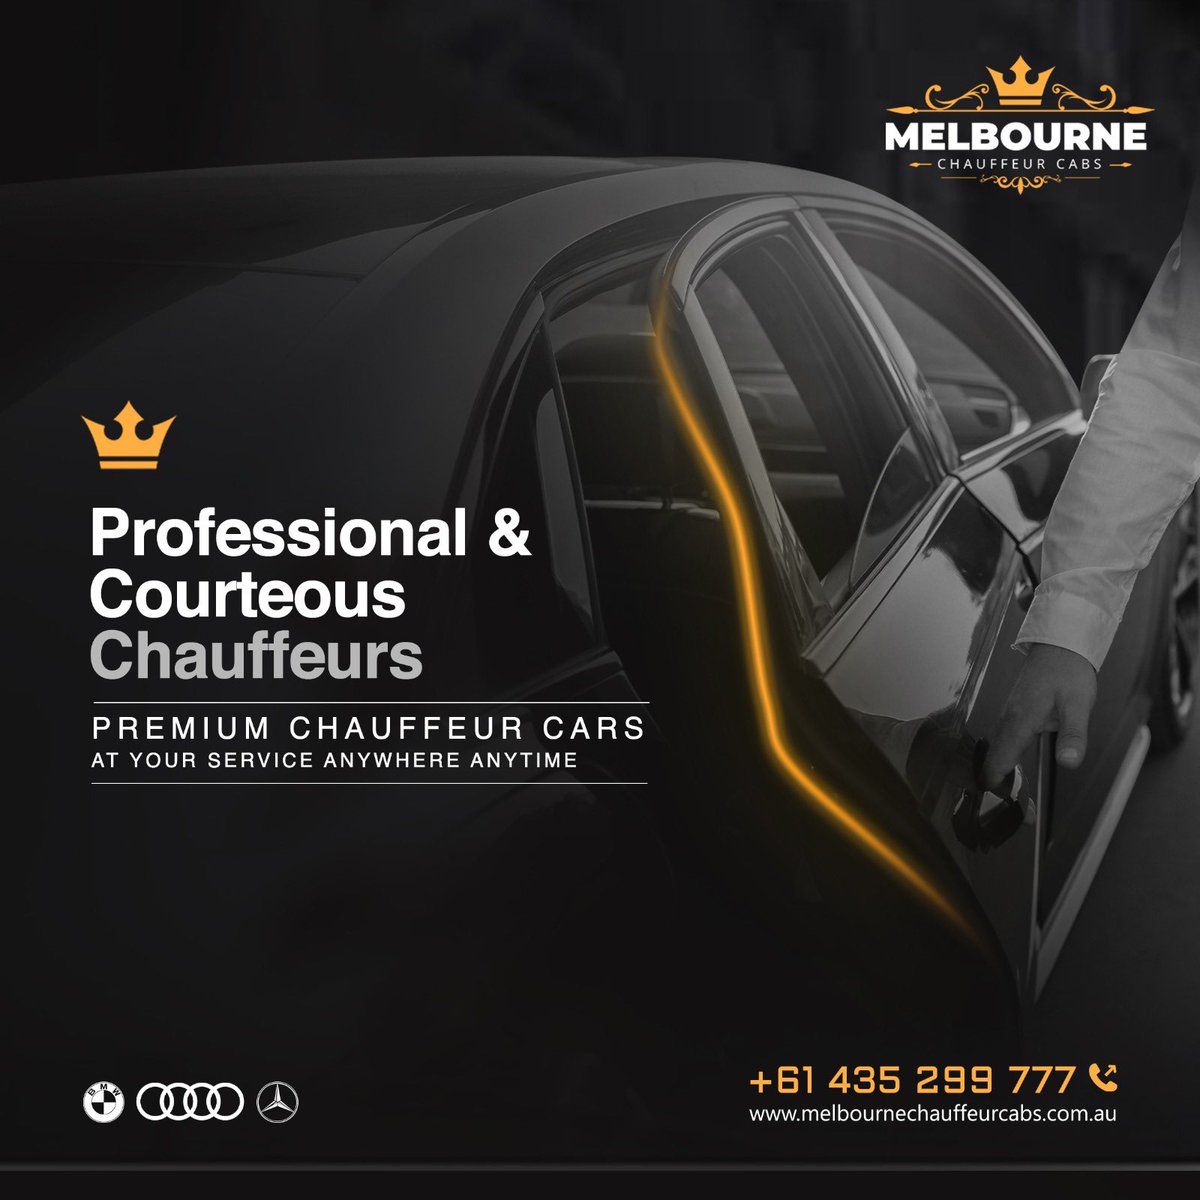 🚘 Elevate your travel experience with Melbourne Chauffeur Cabs' professional chauffeur services. Discover why people choose us for a luxurious and stress-free ride every time. Ready to ride in style? Book with us today! melbournechauffeurcabs.com.au 📞 +61 435 299 777